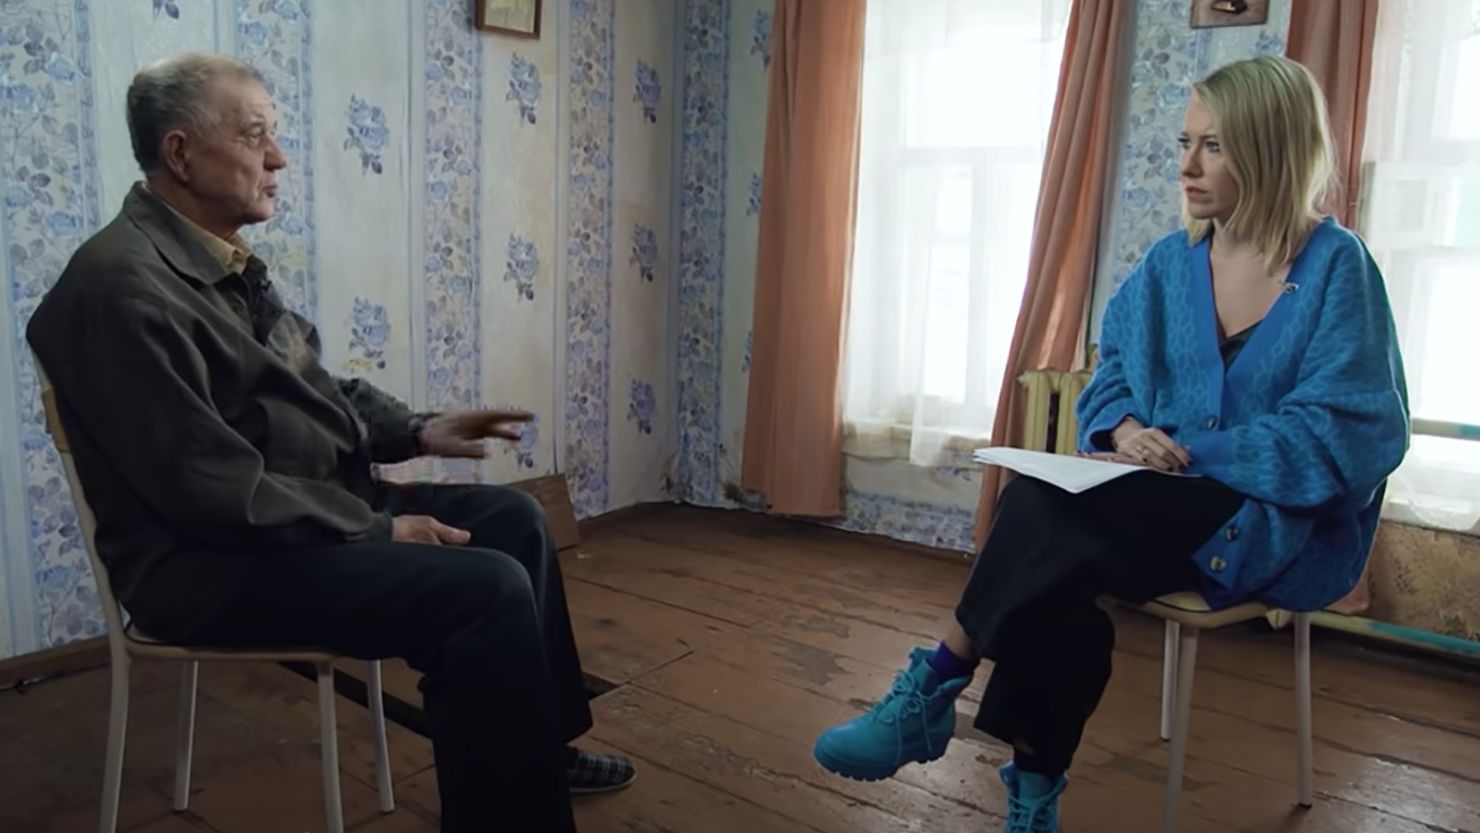 Ksenia Sobchak interviewed 70-year-old Viktor Mokhov, who was sentenced to 17 years in a high-security colony for the kidnap and rape of two teenage girls, whom he kept in a basement for almost four years. 